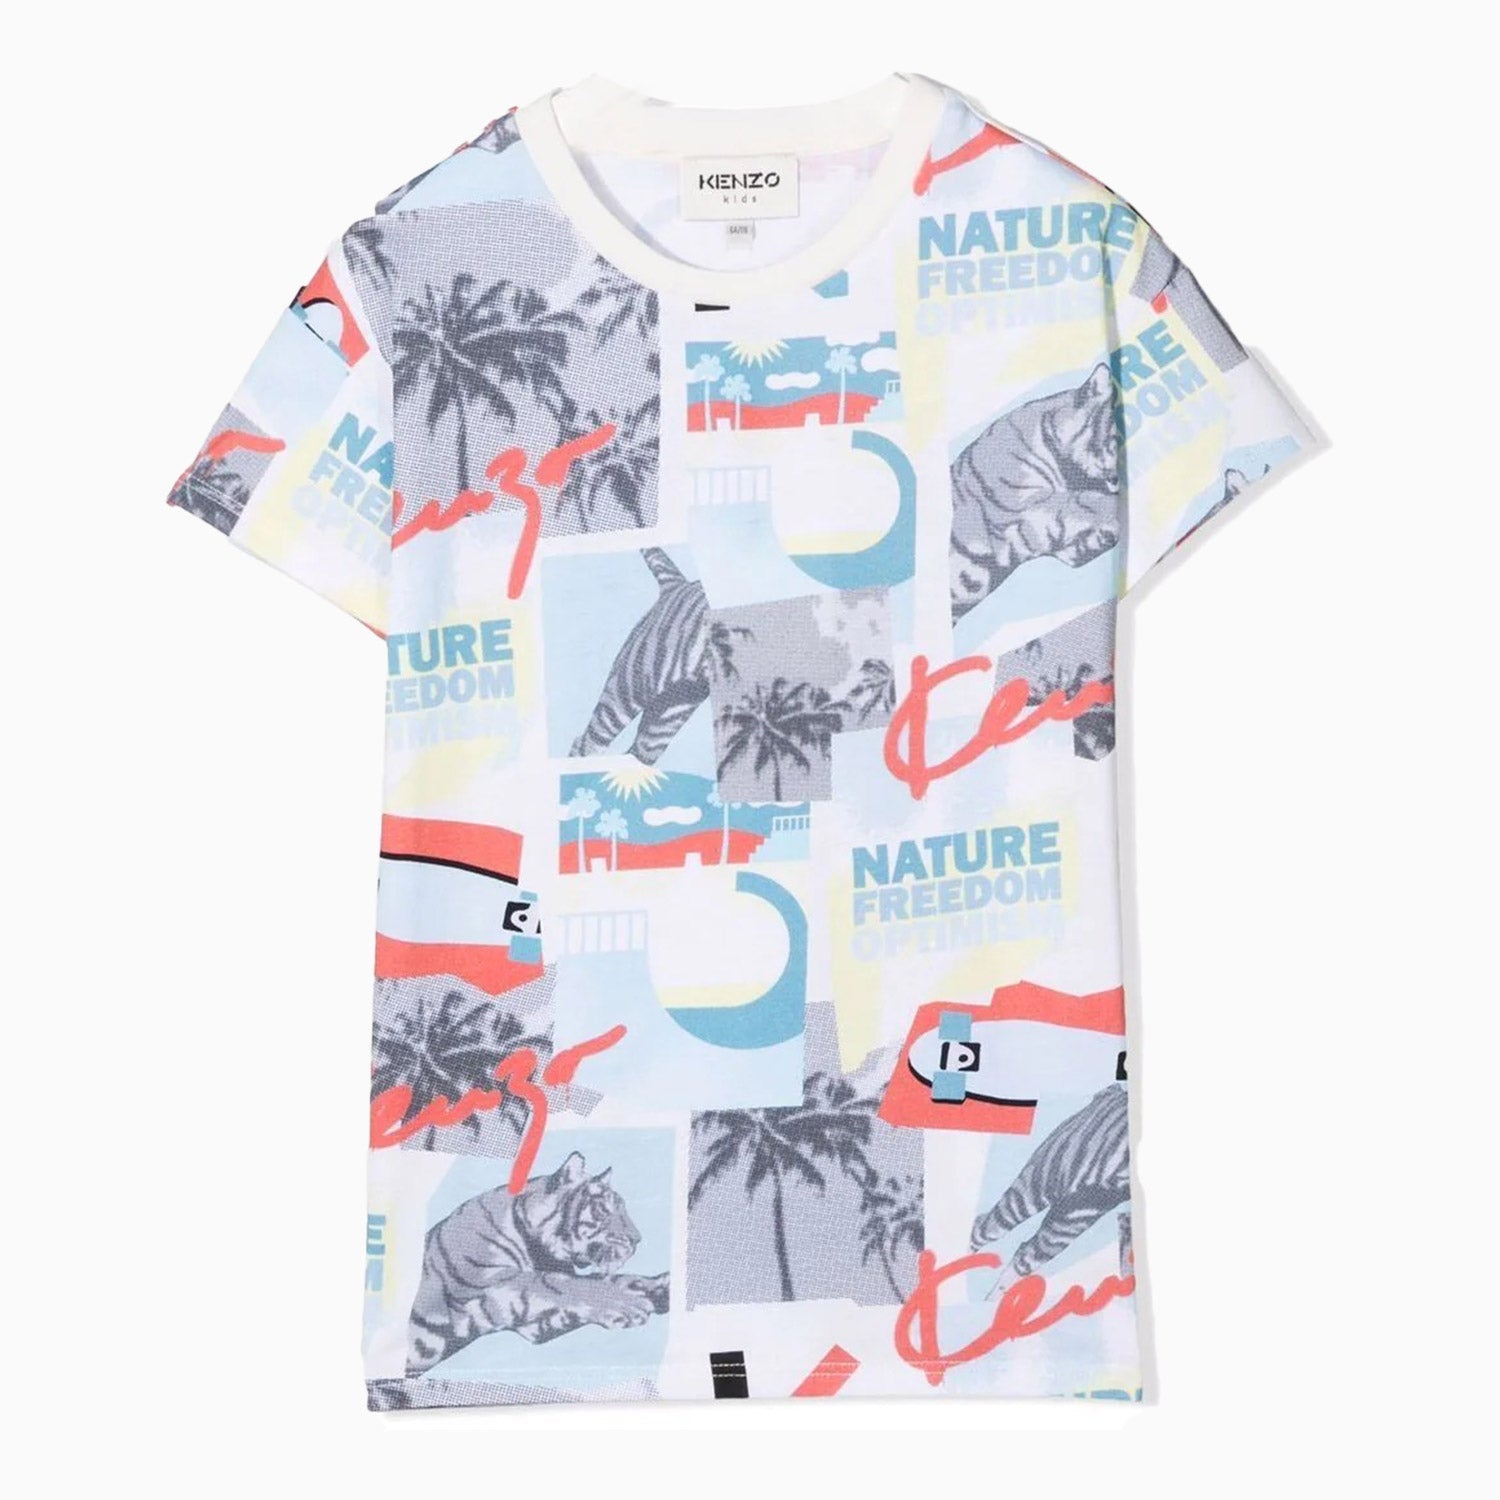 Kenzo Kid's Freedom Graphic T Shirt - Color: Off White - Kids Premium Clothing -